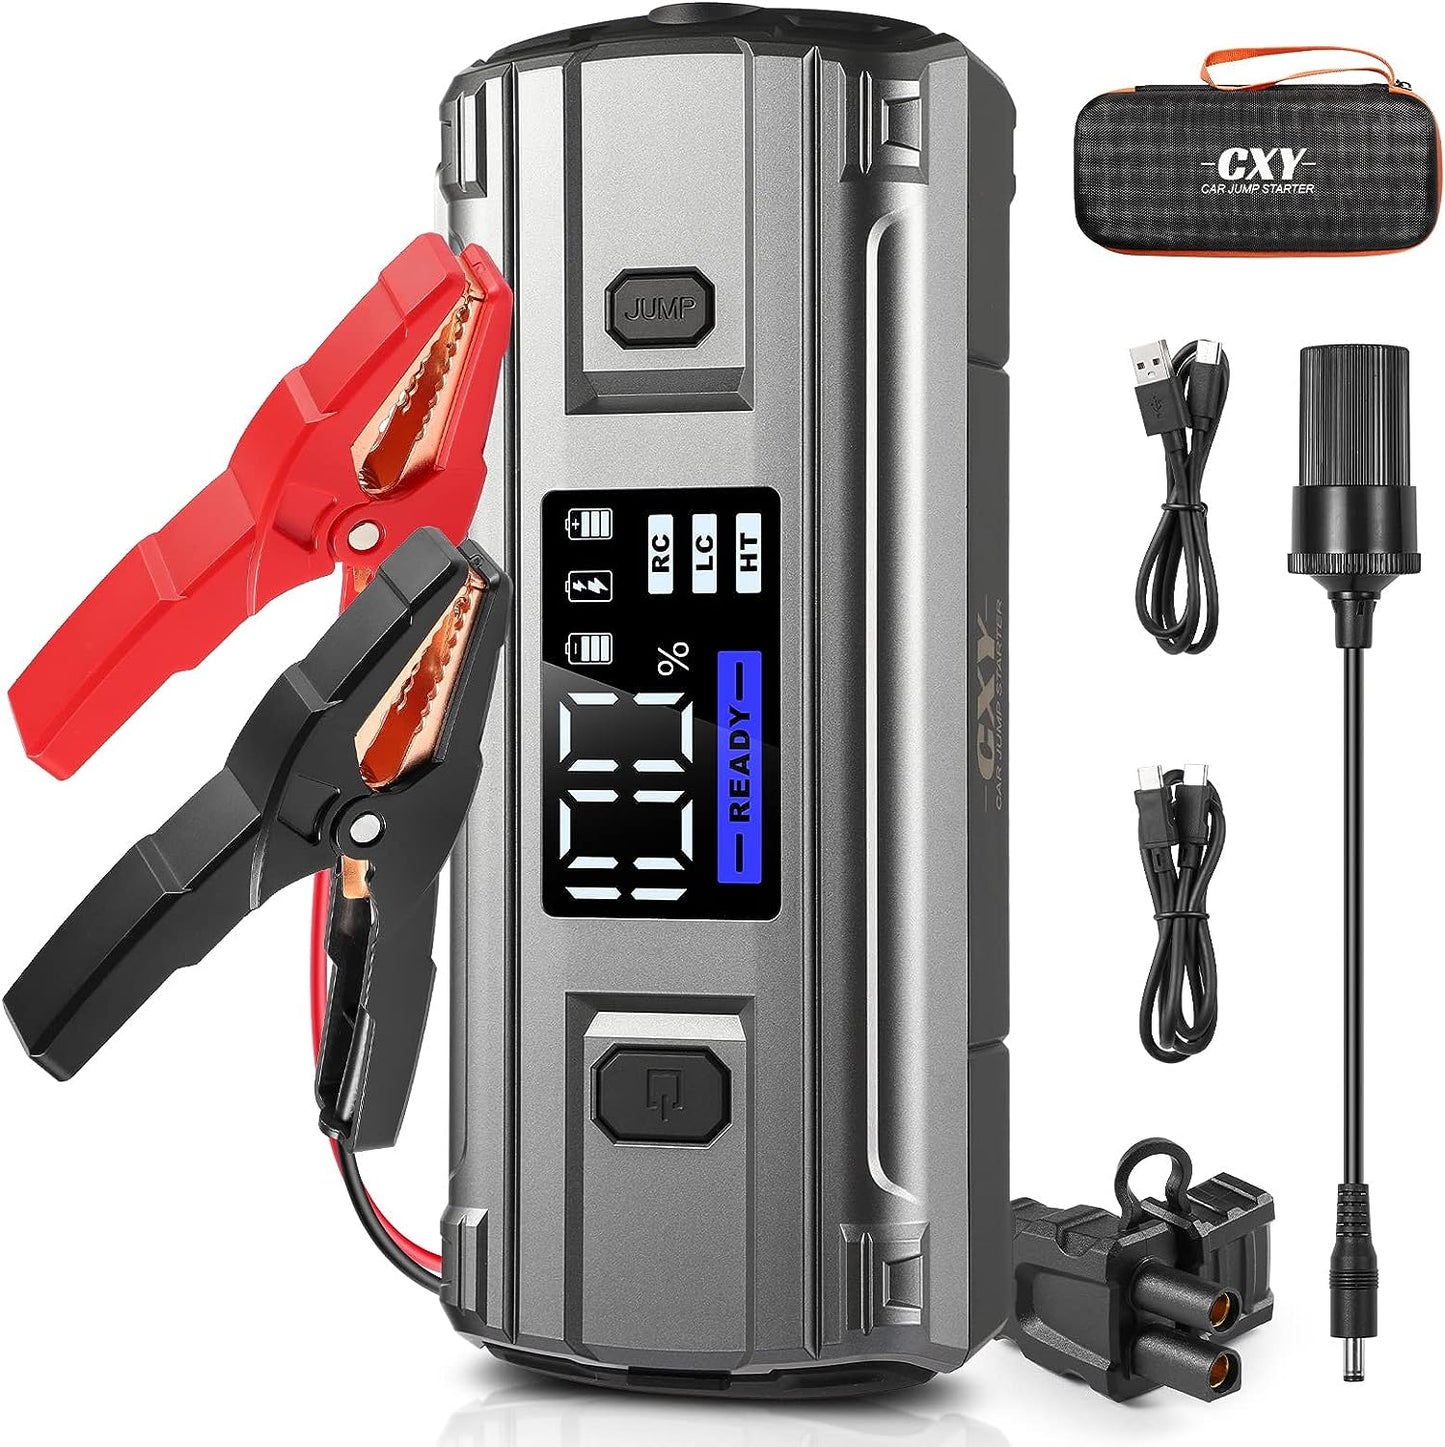 Cxy T13Plus 2000A Jump Starter Power Pack,65W in/Out Fast Charging 12V Car Jump Starter for Up to 8.5L Petrol or 6L Diesel Engines